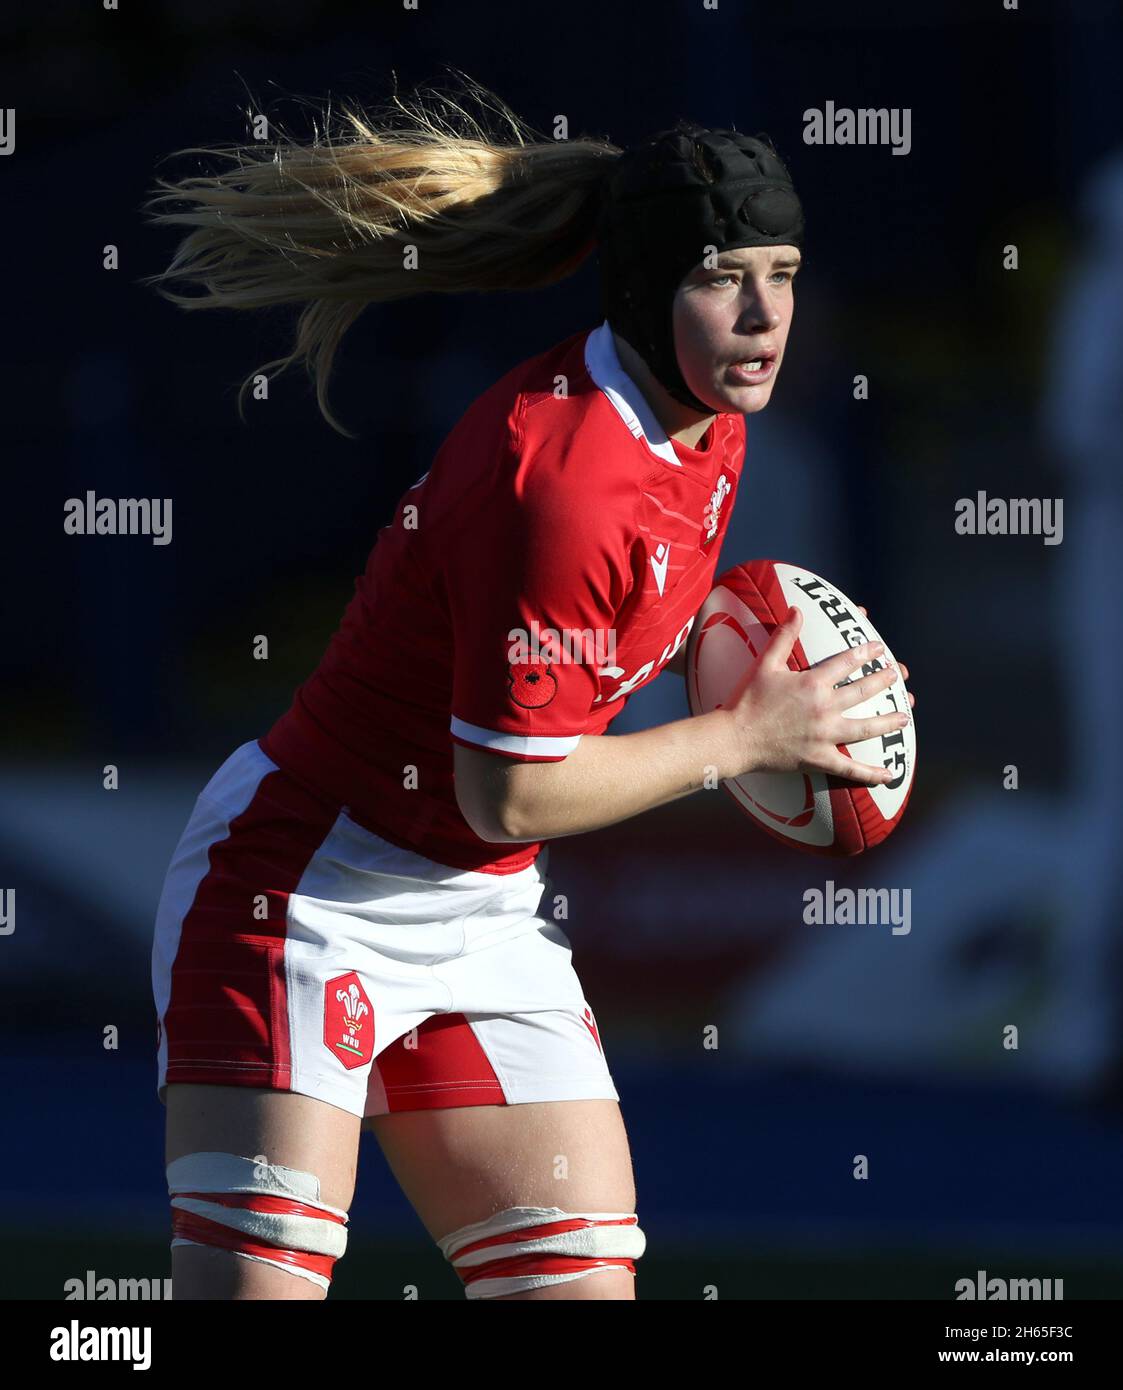 Wales' Bethan Lewis during the Autumn International match at Cardiff Arms park, Cardiff. Picture date: Saturday November 13, 2021. See PA story RUGBYU Wales Women. Photo credit should read: Bradley Collyer/PA Wire. RESTRICTIONS: Use subject to restrictions. Editorial use only, no commercial use without prior consent from rights holder. Stock Photo